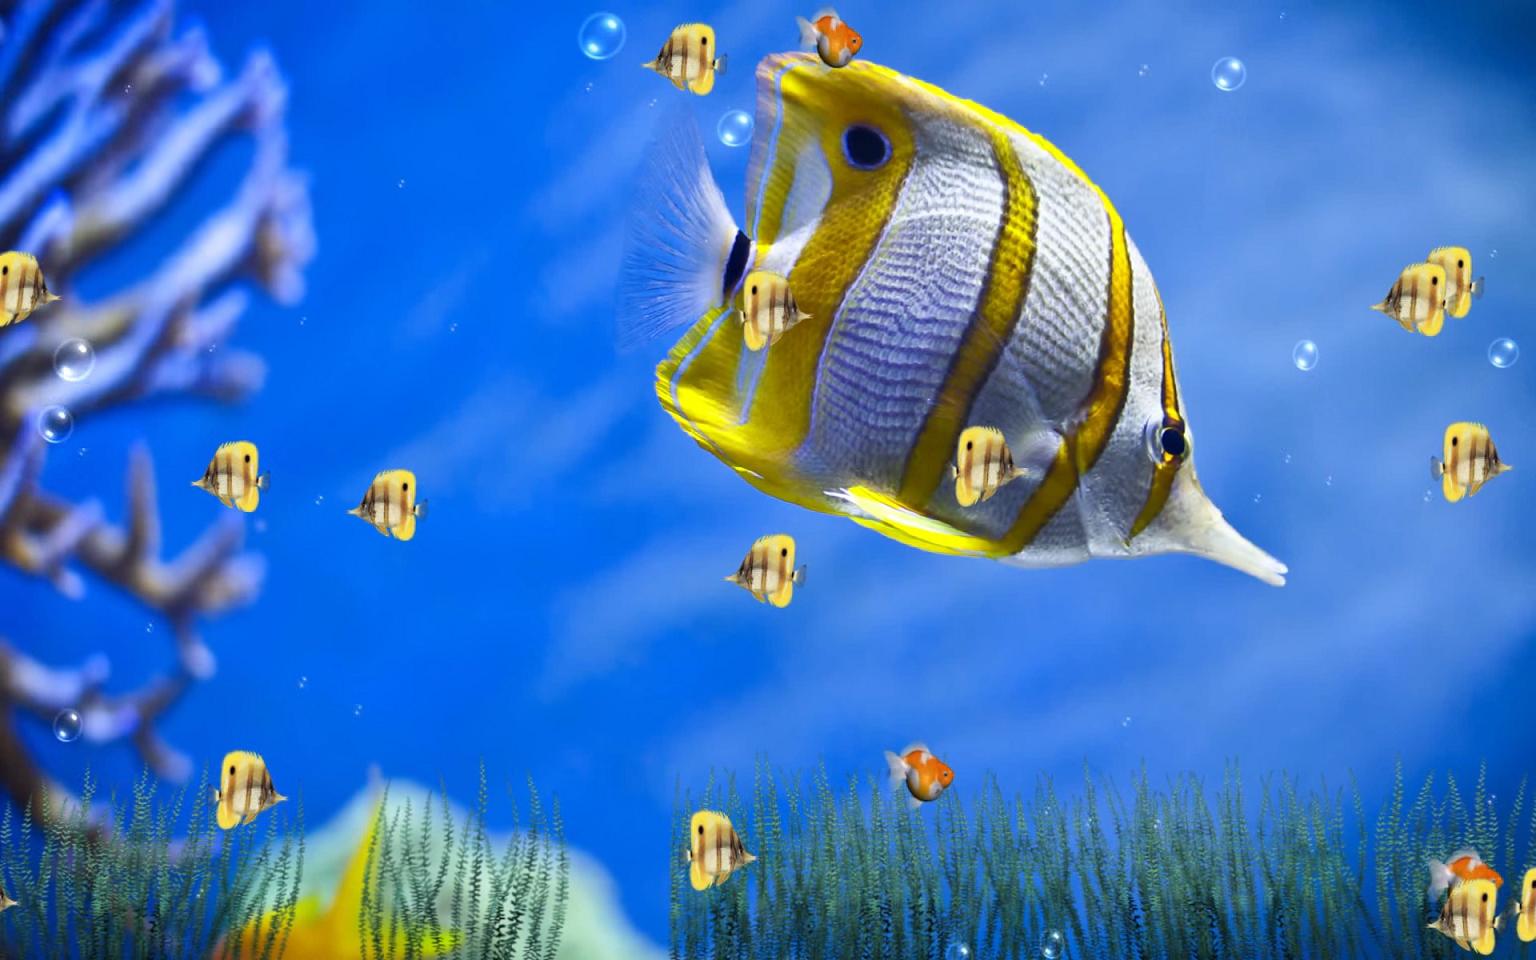 Hmoo5jz8 S1600 Animated Wallpaper Of Fish In HD For Desktop Jpeg